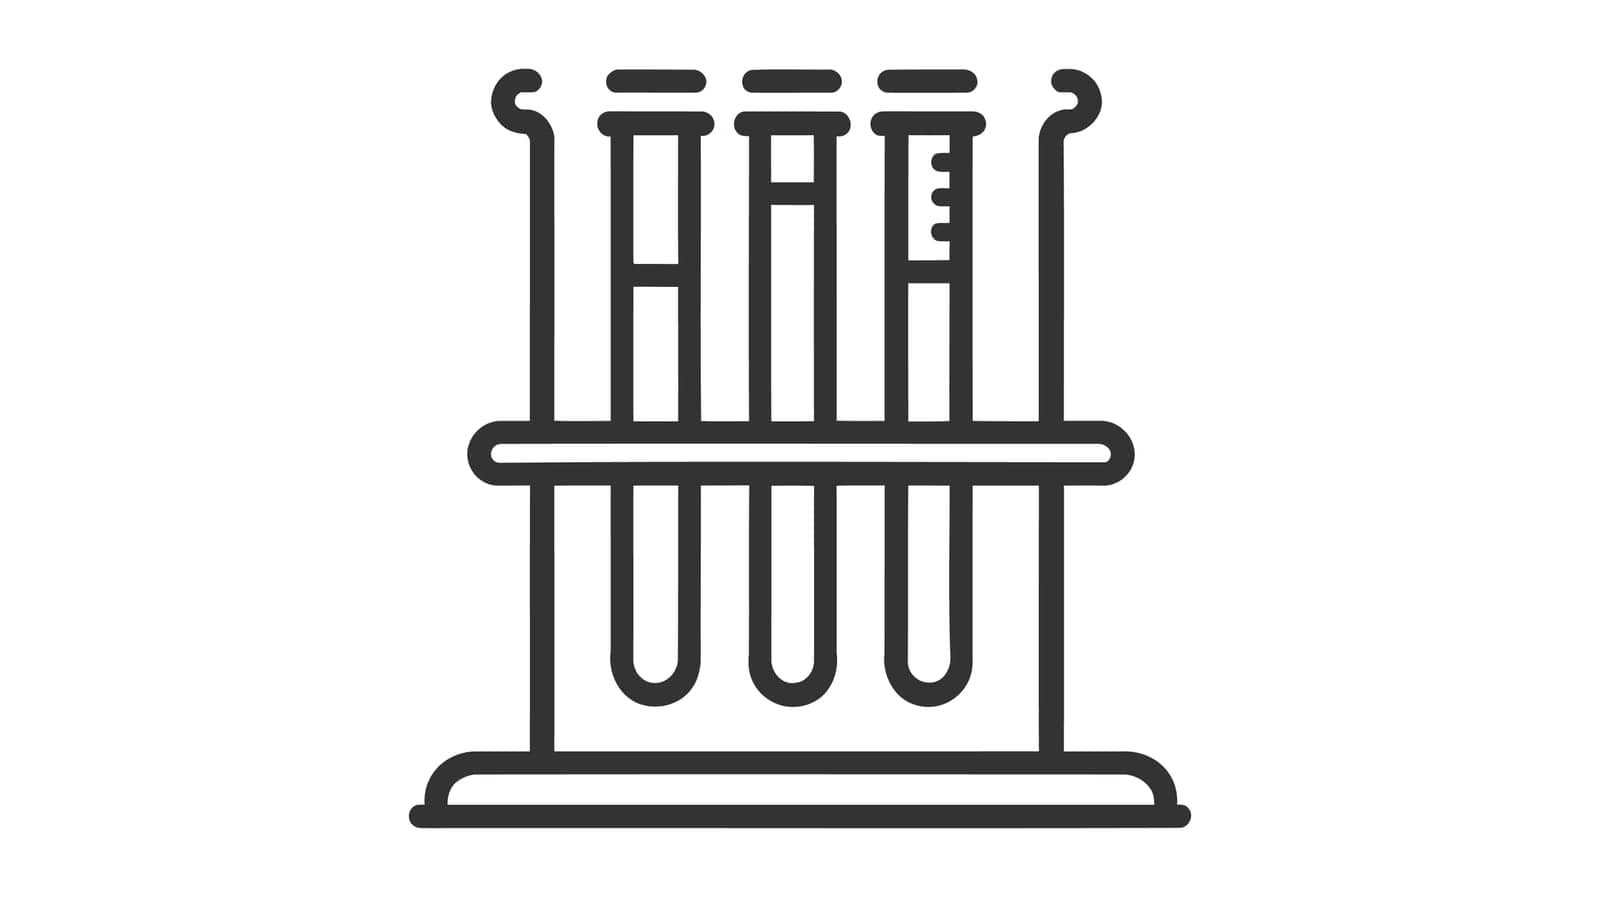 A simple black and white icon of a test tube rack with multiple test tubes, marked with measurement lines.